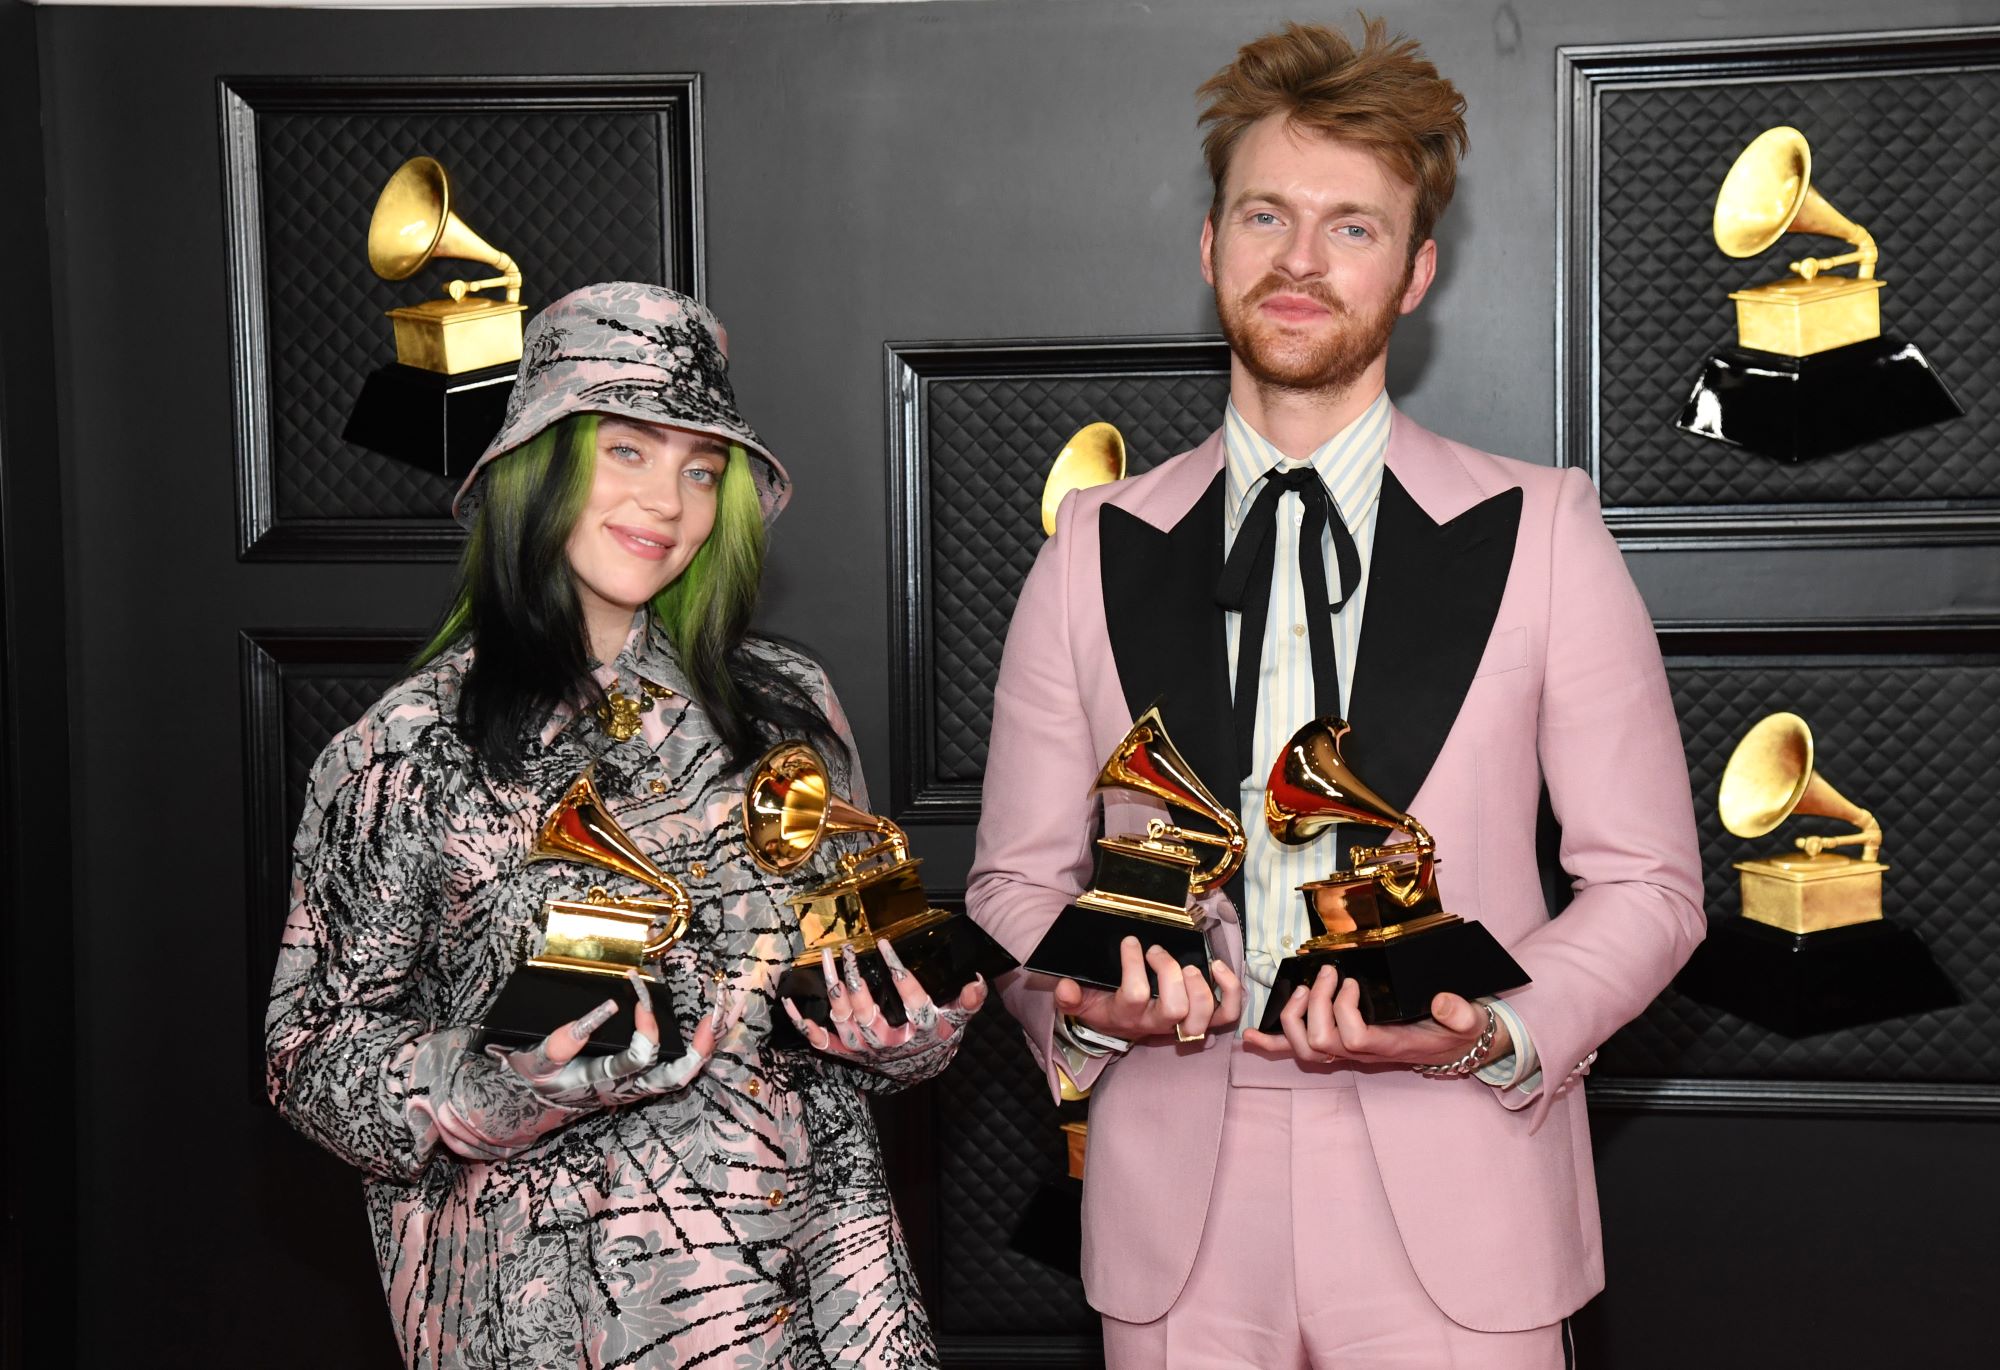 ‘No Time to Die’: Billie Eilish and Finneas Reveal the Creative Process Behind Their Bond Song